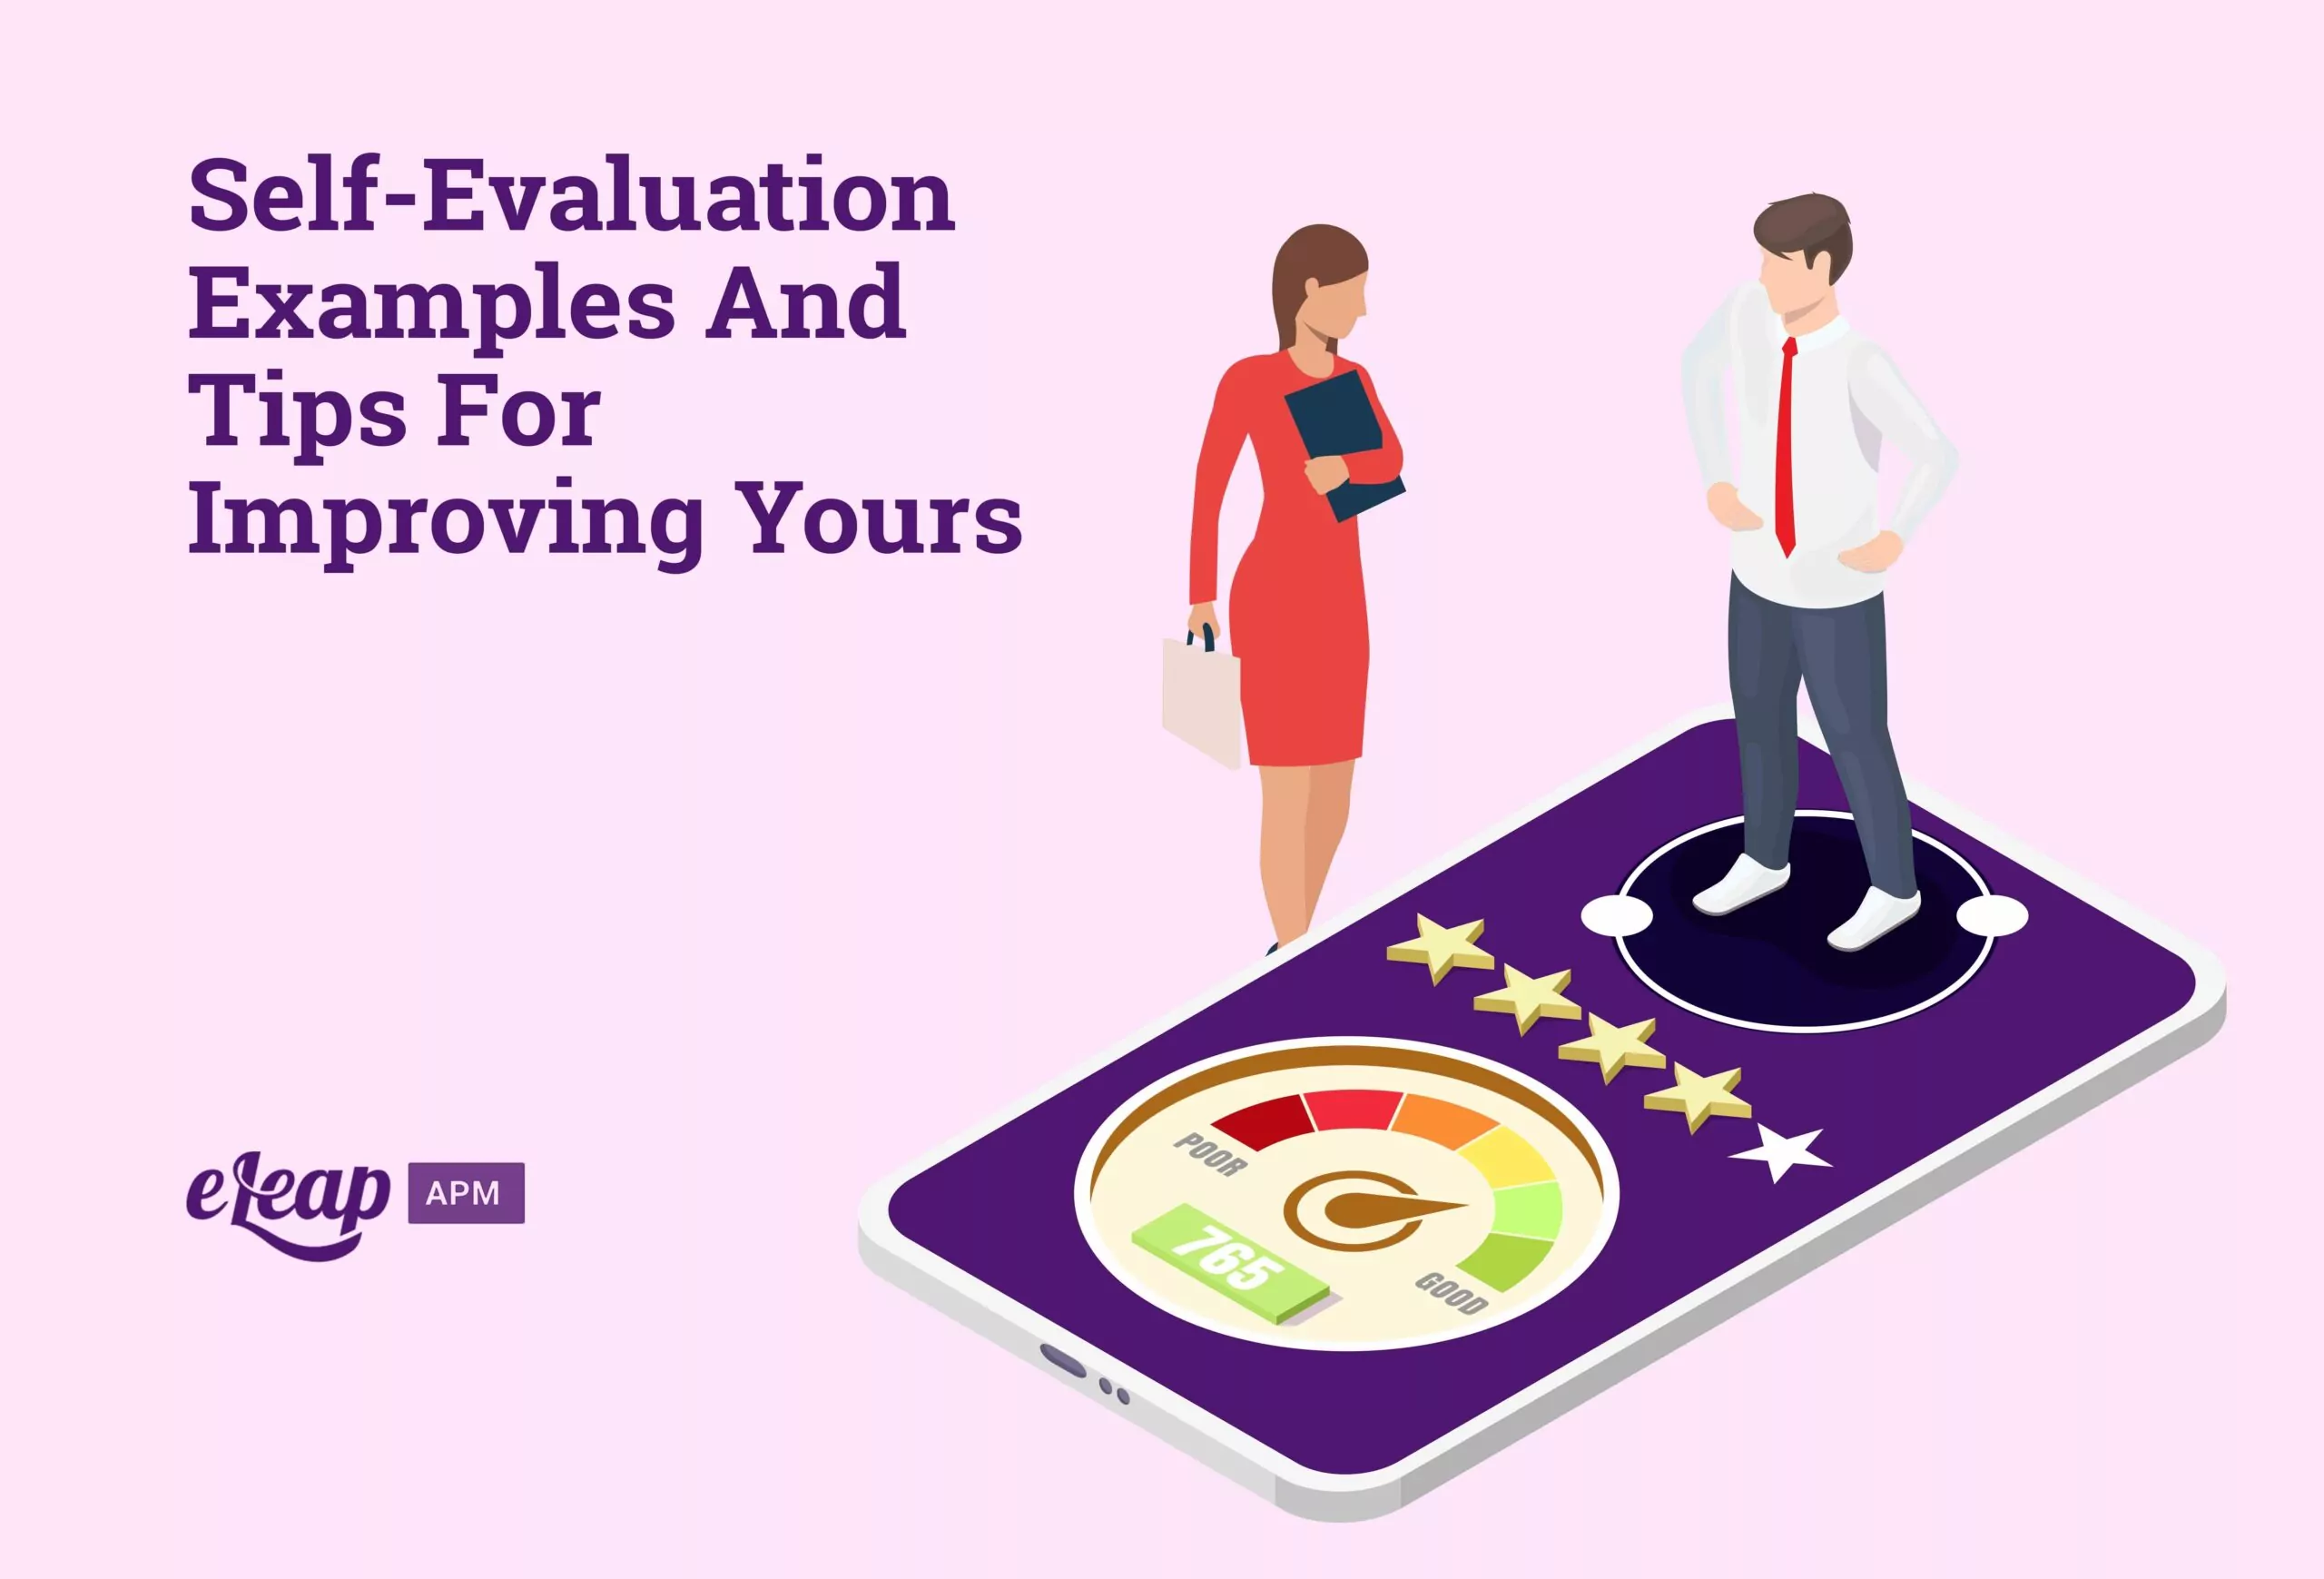 Self-Evaluation Examples and Tips for Improving Yours